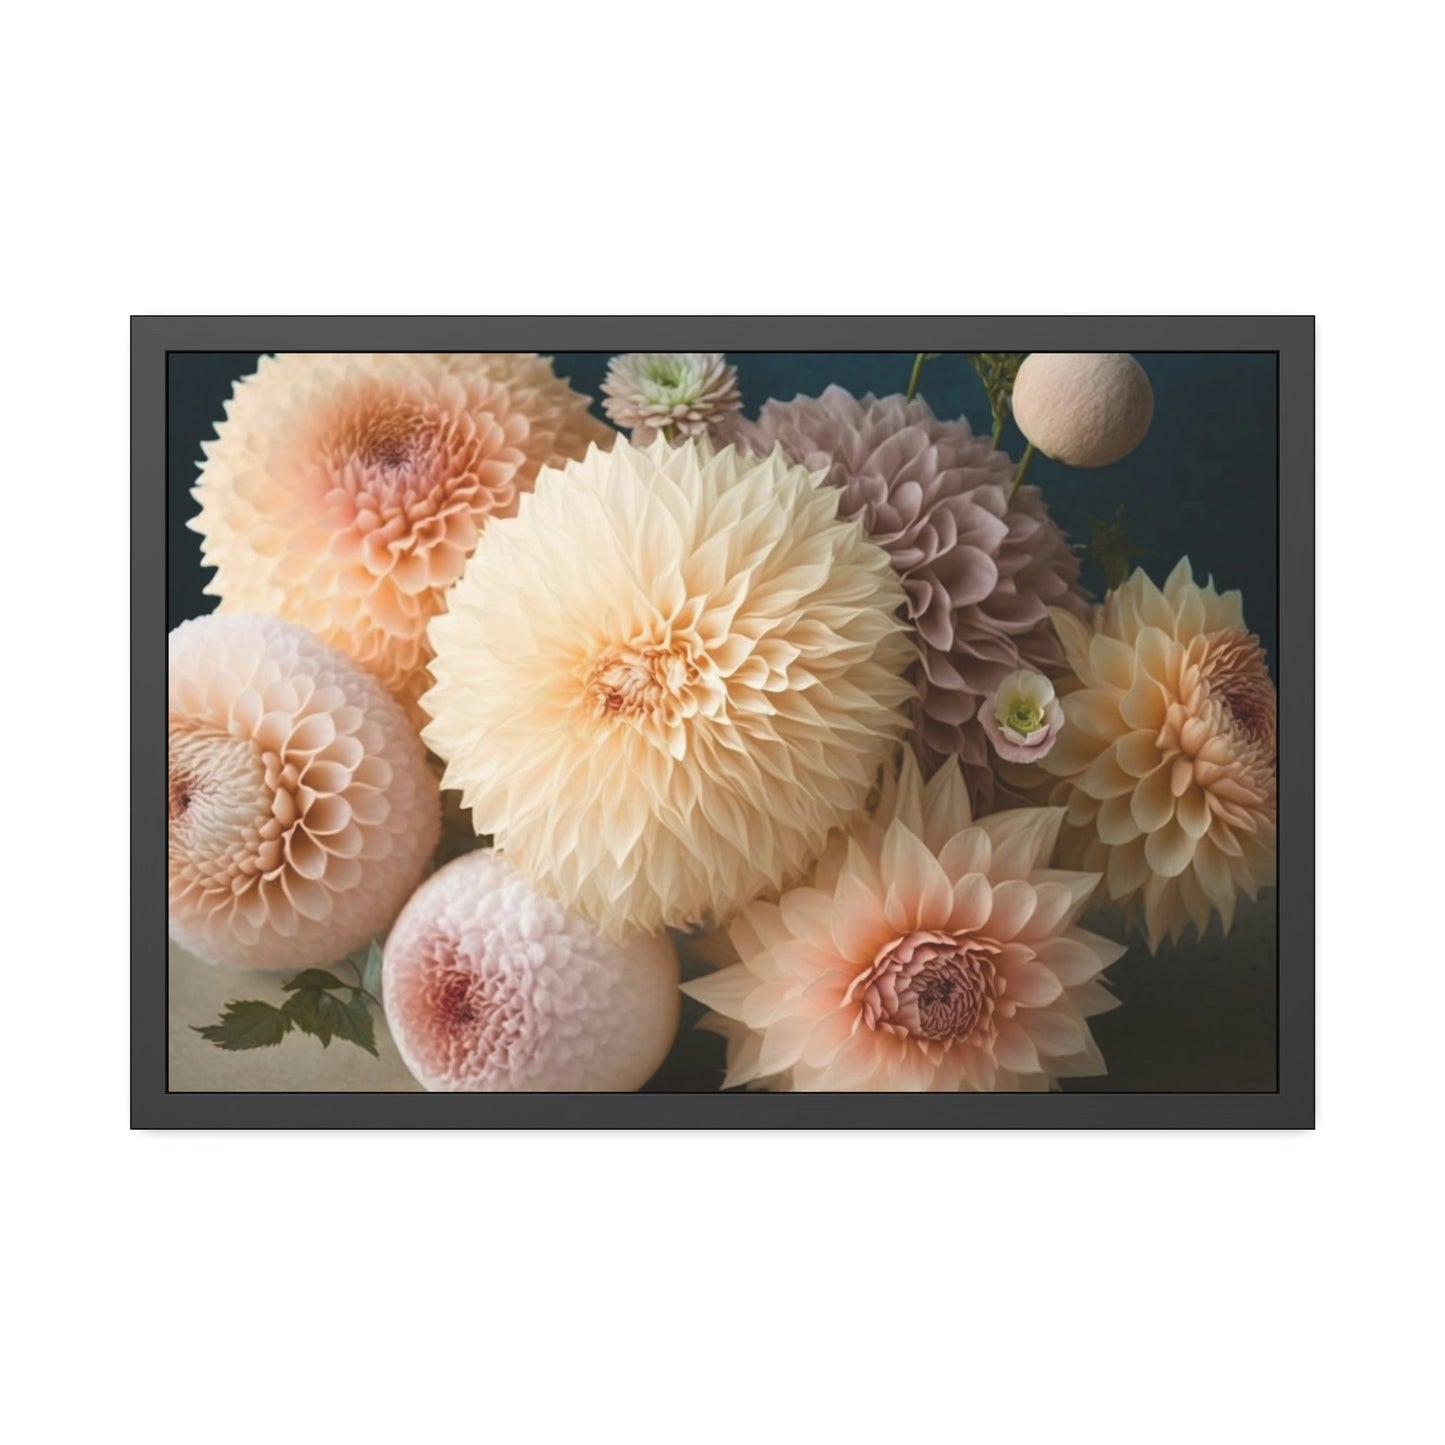 Dahlias in Bloom: A Natural Canvas & Poster Print of Stunning Flowers